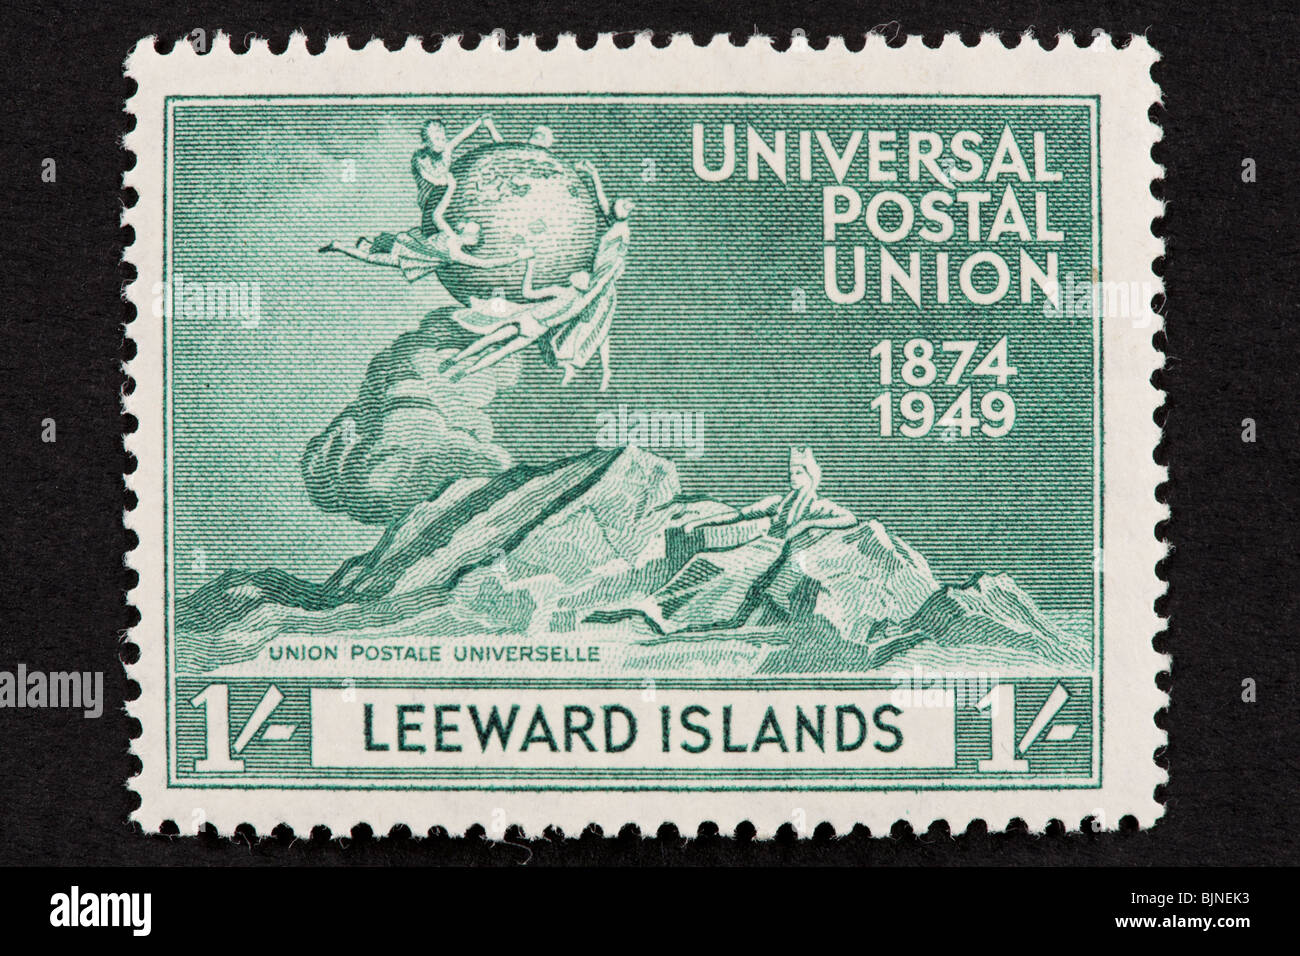 Postage stamp from the Leeward Islands depicting an allegory for the Universal Postal Union  (75'th anniversary). Stock Photo